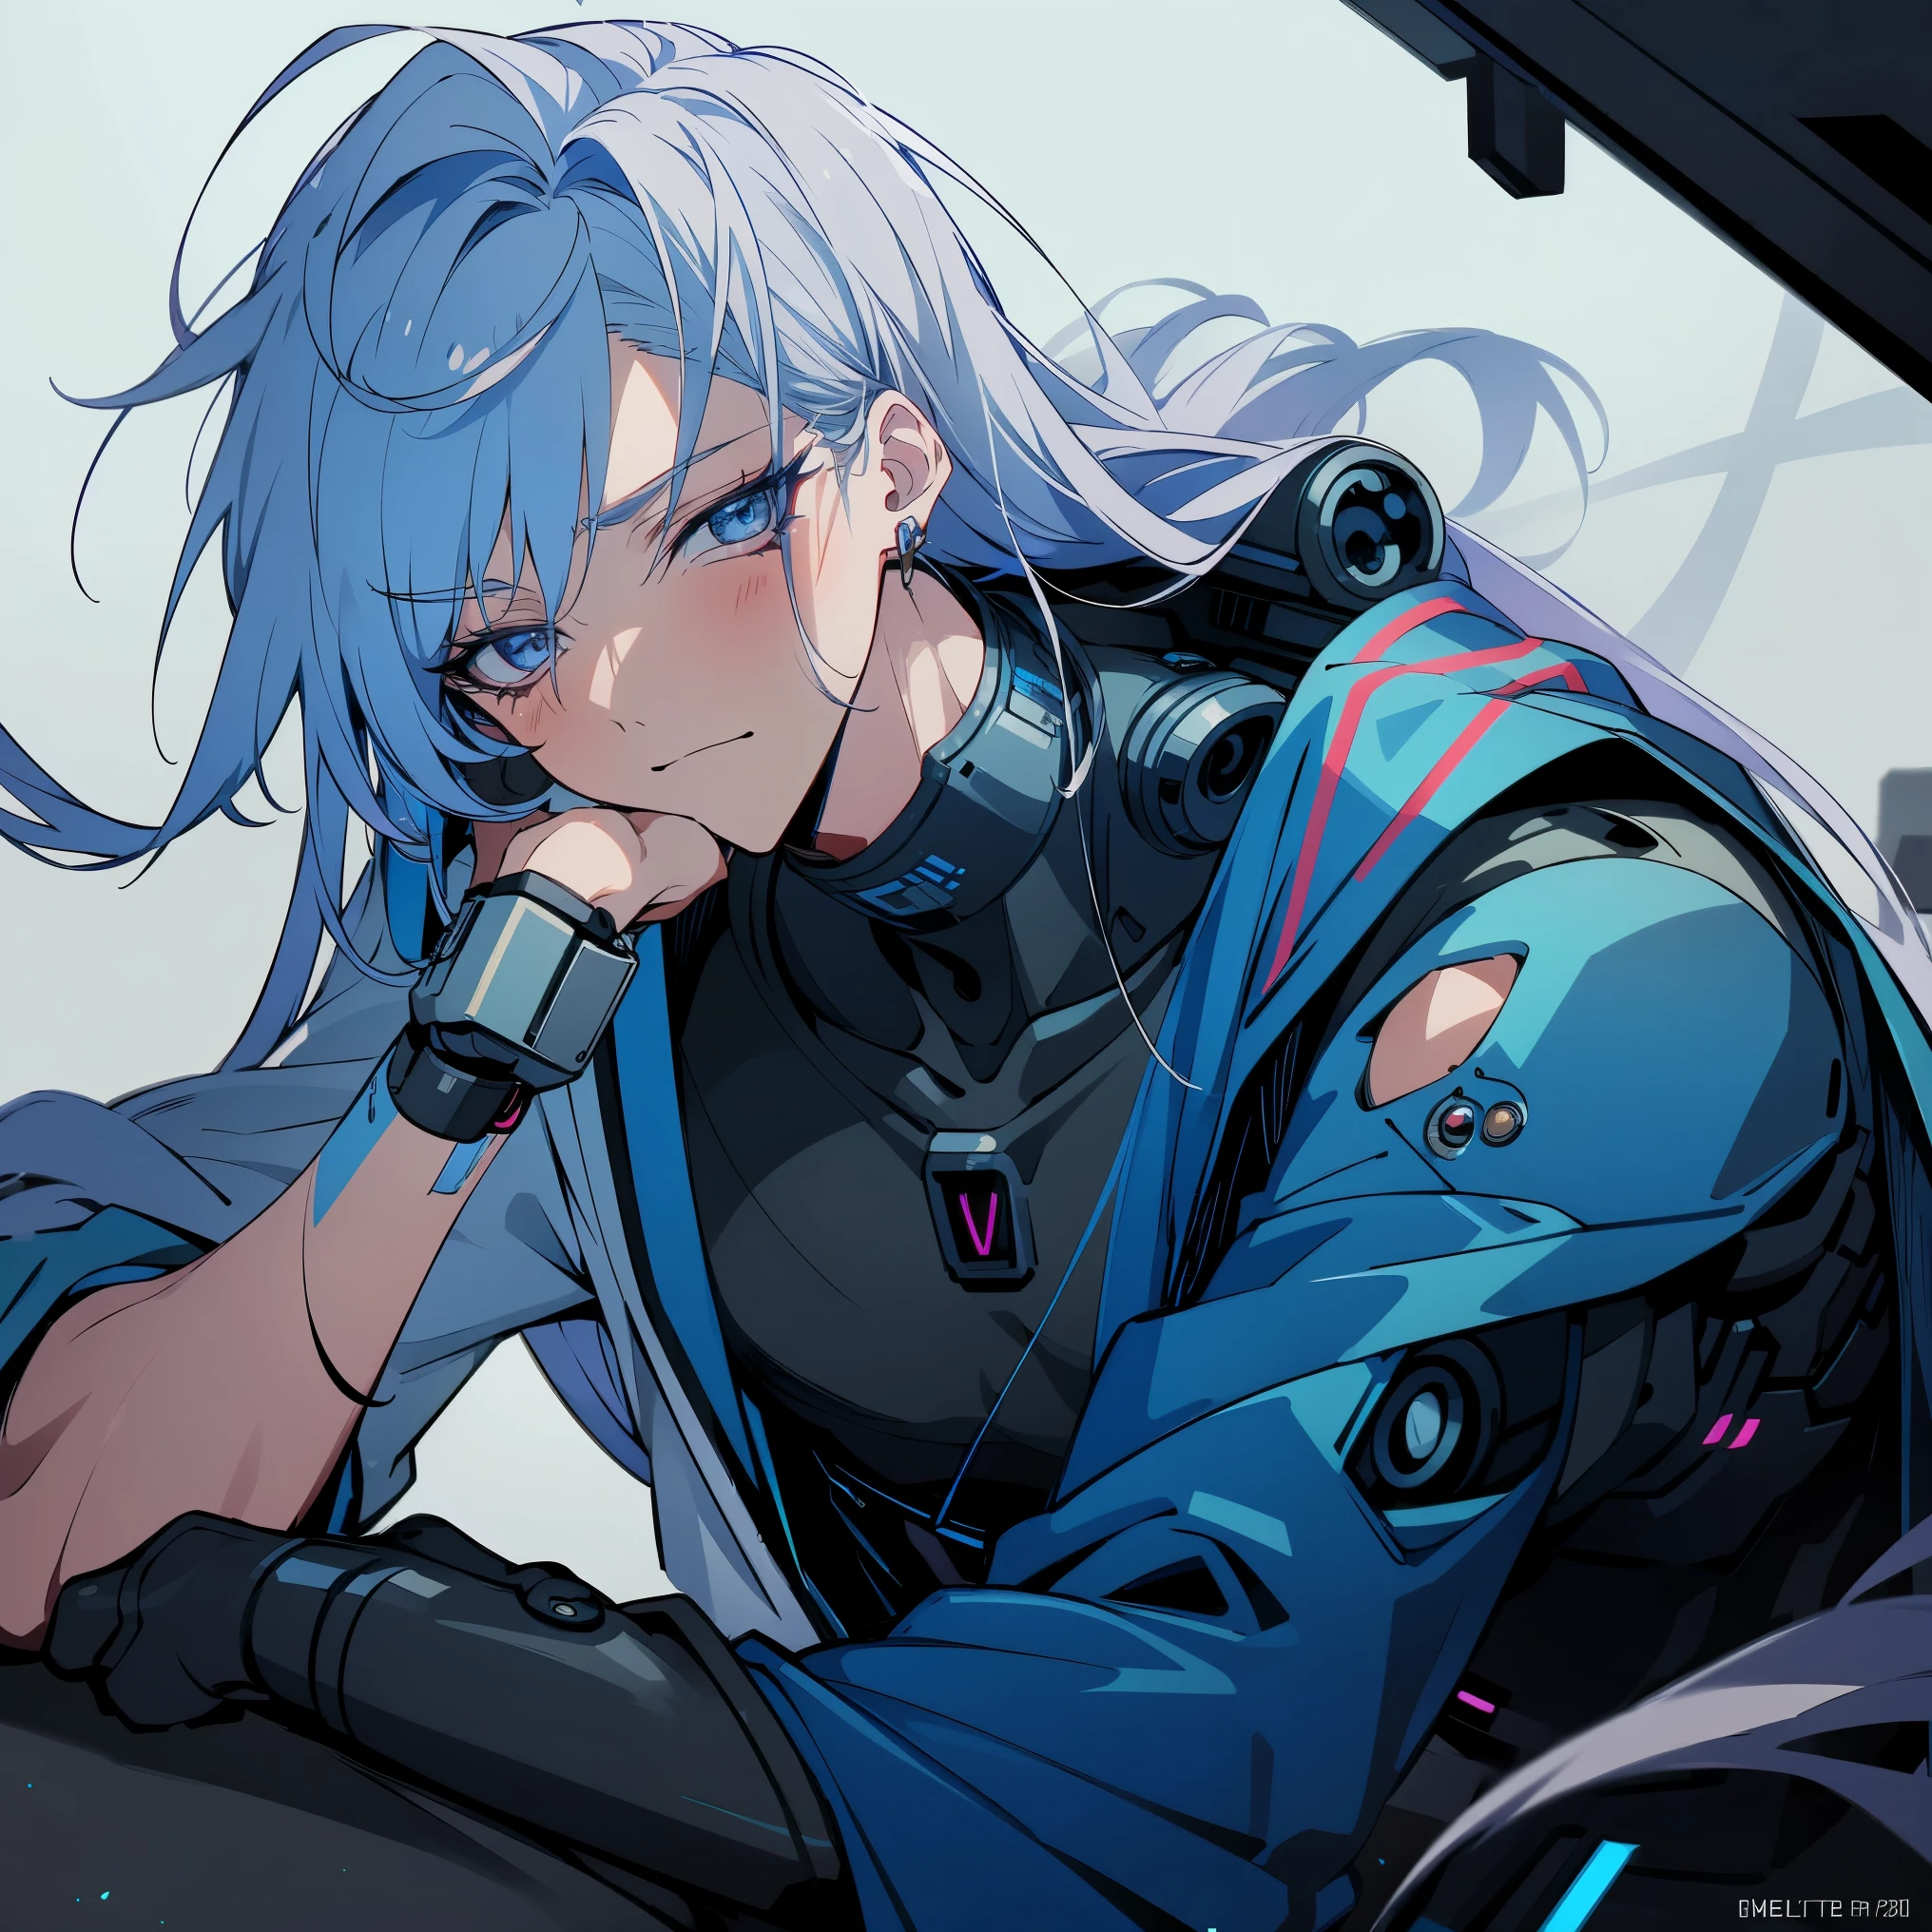 Cyborg male character, gorgeous, blue shiny eyes, angelic beauty, visible robotic/mechanical parts, quiet and shy, broken mechanical parts, melancholic look, cyberpunk inspired, handsome, innocent look, long lashes, beautiful eyes, long shiny hair, interesting pose, hair moving